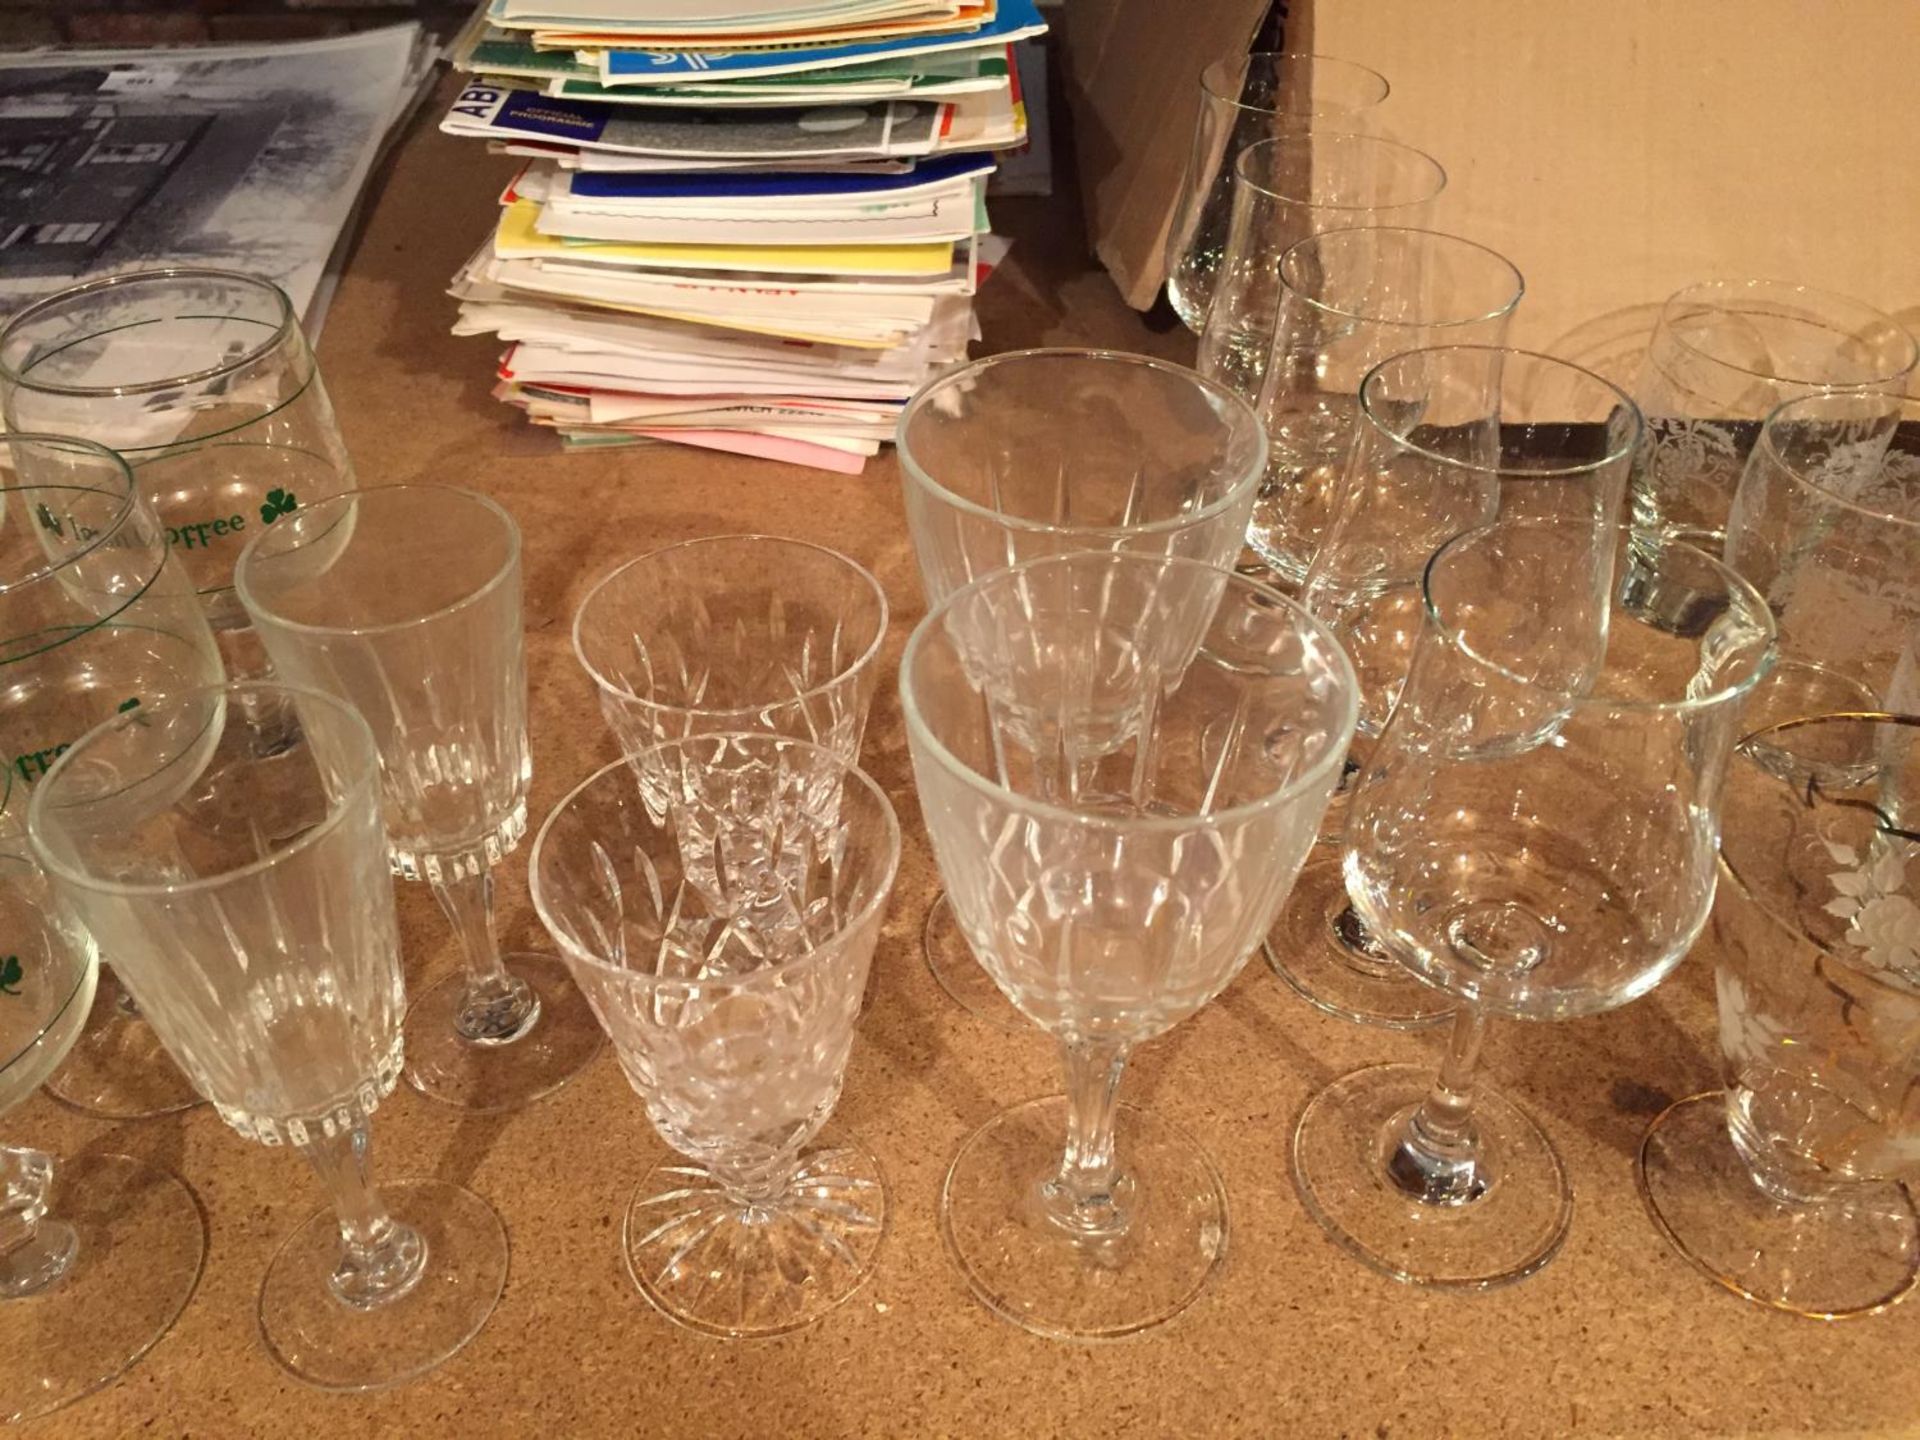 A LARGE COLLECTION OF VARIOUS GLASSES TO INCLUDE WINE, LIQUOR, IRISH COFFEE ETC - Image 3 of 5